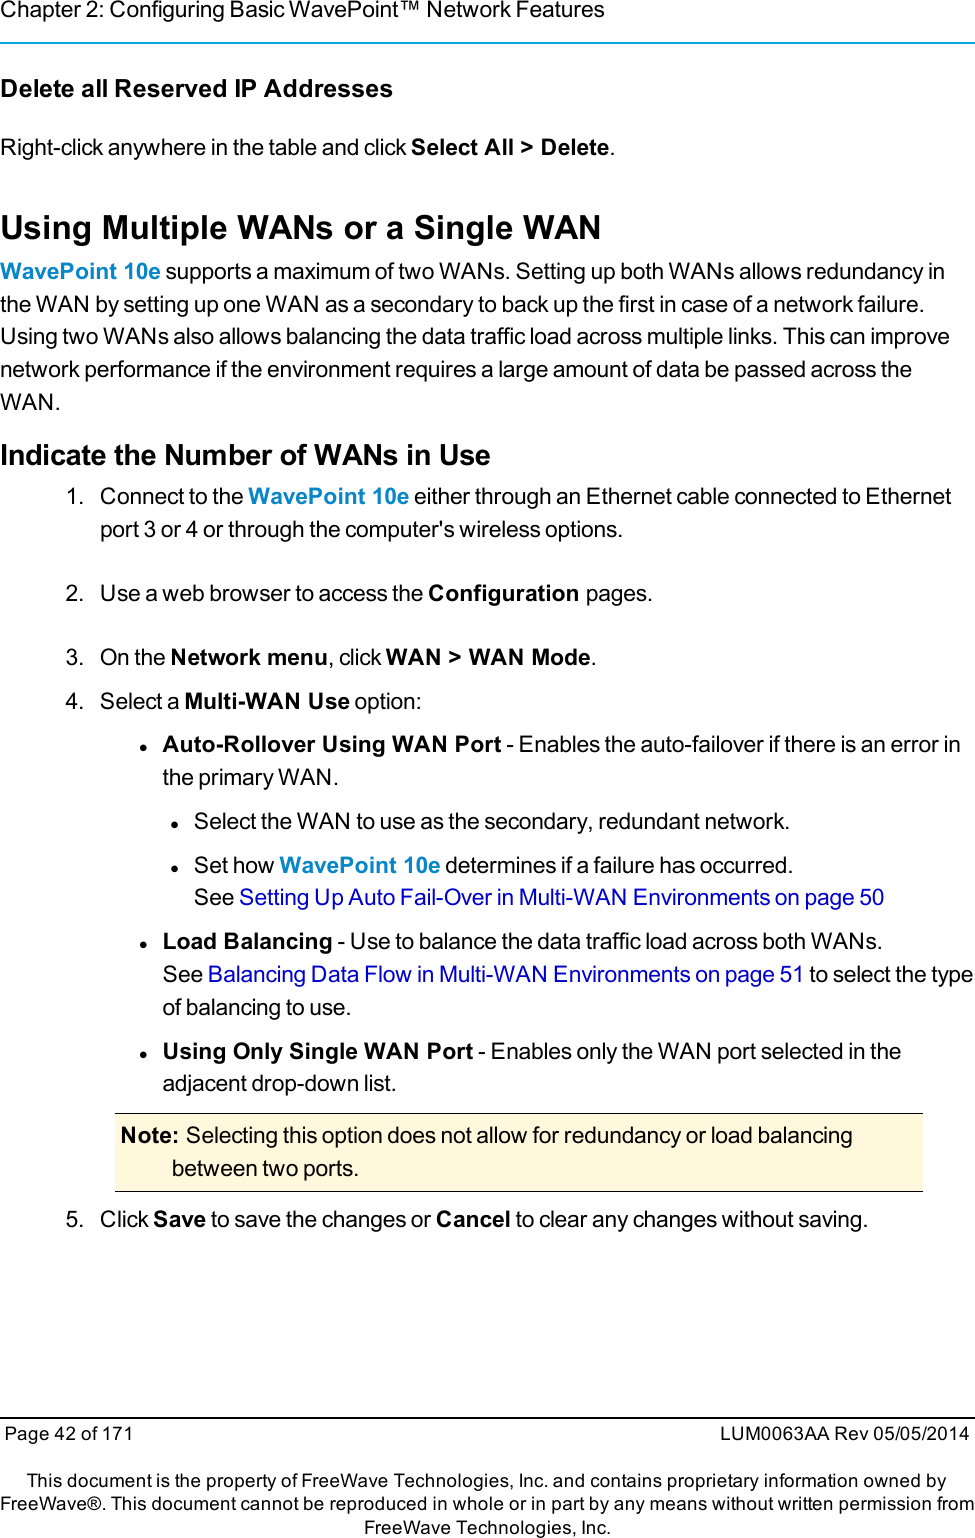 Chapter 2: Configuring Basic WavePoint™ Network FeaturesDelete all Reserved IP AddressesRight-click anywhere in the table and click Select All &gt; Delete.Using Multiple WANs or a Single WANWavePoint 10e supports a maximum of two WANs. Setting up both WANs allows redundancy inthe WAN by setting up one WAN as a secondary to back up the first in case of a network failure.Using two WANs also allows balancing the data traffic load across multiple links. This can improvenetwork performance if the environment requires a large amount of data be passed across theWAN.Indicate the Number of WANs in Use1. Connect to the WavePoint 10e either through an Ethernet cable connected to Ethernetport 3 or 4 or through the computer&apos;s wireless options.2. Use a web browser to access the Configuration pages.3. On the Network menu, click WAN &gt; WAN Mode.4. Select a Multi-WAN Use option:lAuto-Rollover Using WAN Port - Enables the auto-failover if there is an error inthe primary WAN.lSelect the WAN to use as the secondary, redundant network.lSet how WavePoint 10e determines if a failure has occurred.See Setting Up Auto Fail-Over in Multi-WAN Environments on page 50lLoad Balancing - Use to balance the data traffic load across both WANs.See Balancing Data Flow in Multi-WAN Environments on page 51 to select the typeof balancing to use.lUsing Only Single WAN Port - Enables only the WAN port selected in theadjacent drop-down list.Note: Selecting this option does not allow for redundancy or load balancingbetween two ports.5. Click Save to save the changes or Cancel to clear any changes without saving.Page 42 of 171 LUM0063AA Rev 05/05/2014This document is the property of FreeWave Technologies, Inc. and contains proprietary information owned byFreeWave®. This document cannot be reproduced in whole or in part by any means without written permission fromFreeWave Technologies, Inc.